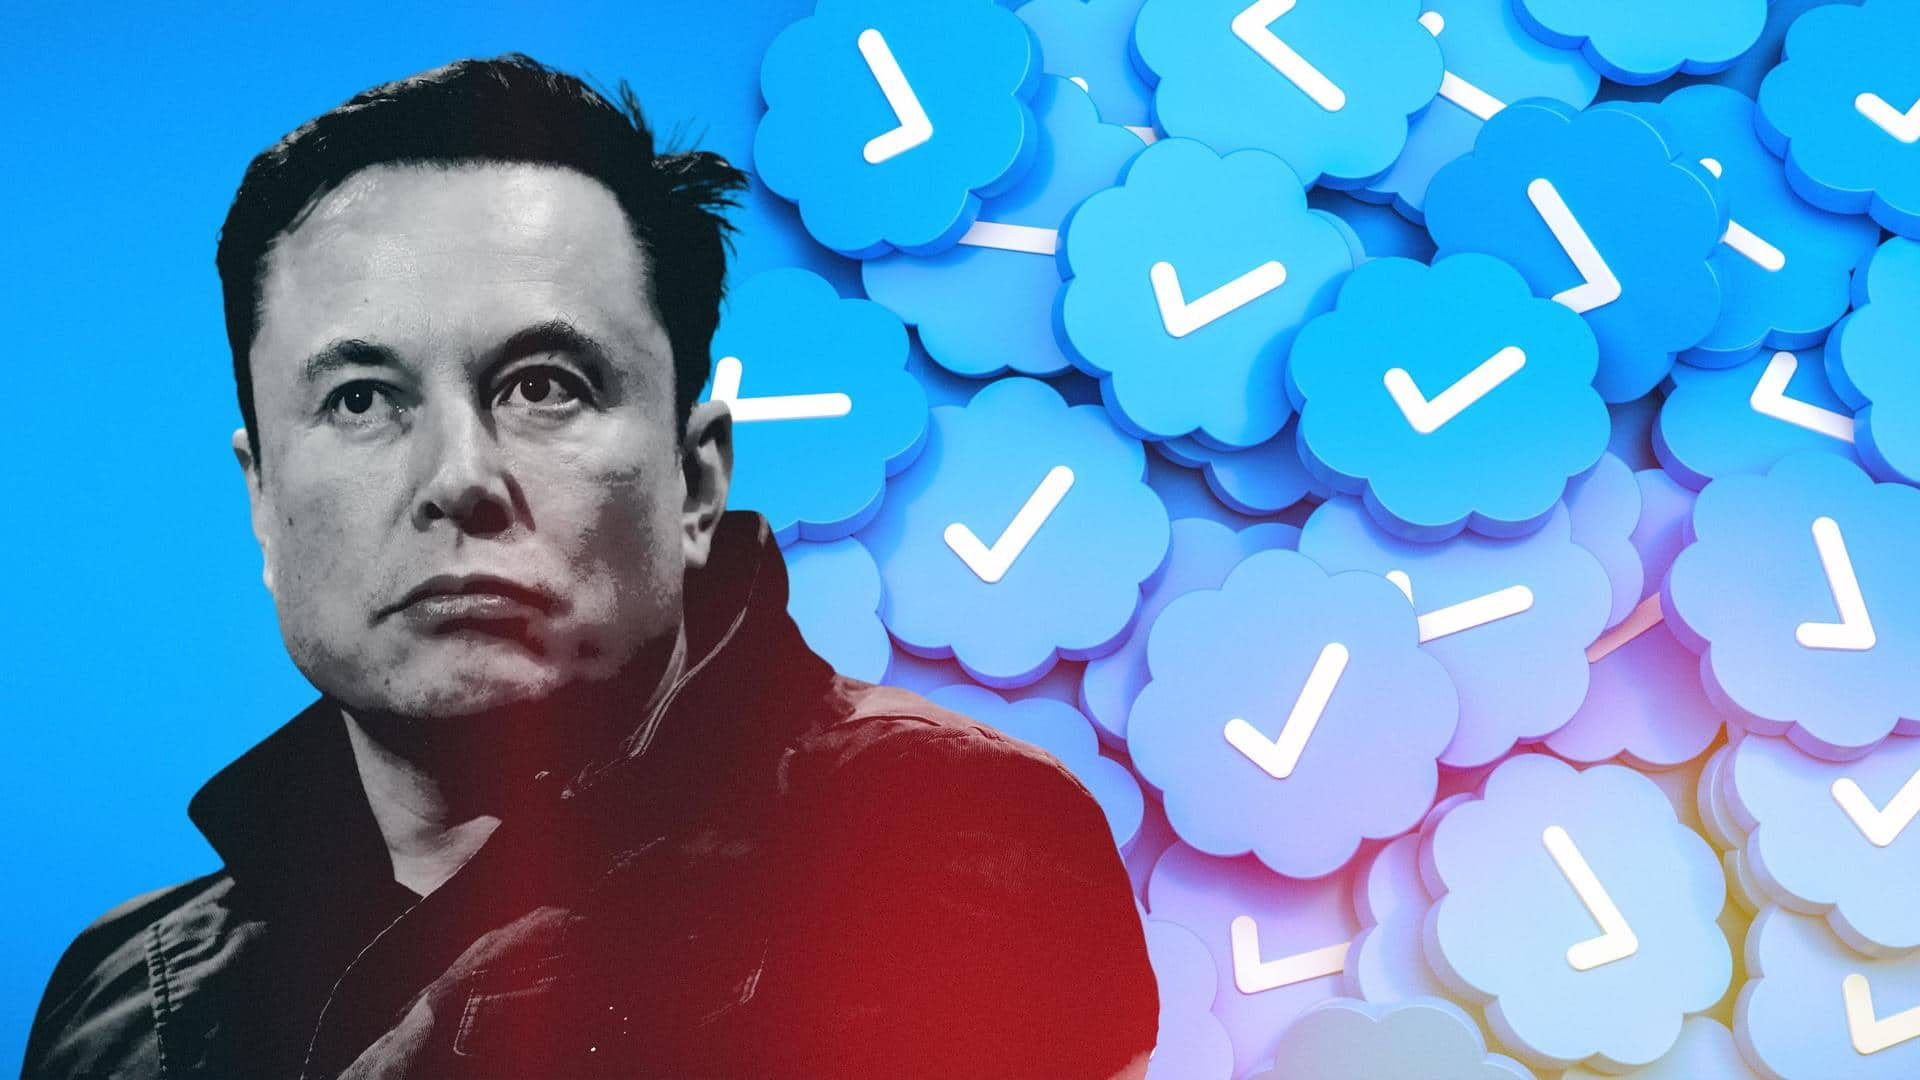 Elon Musk earning over Rs. 80 lakh/month from his subscribers